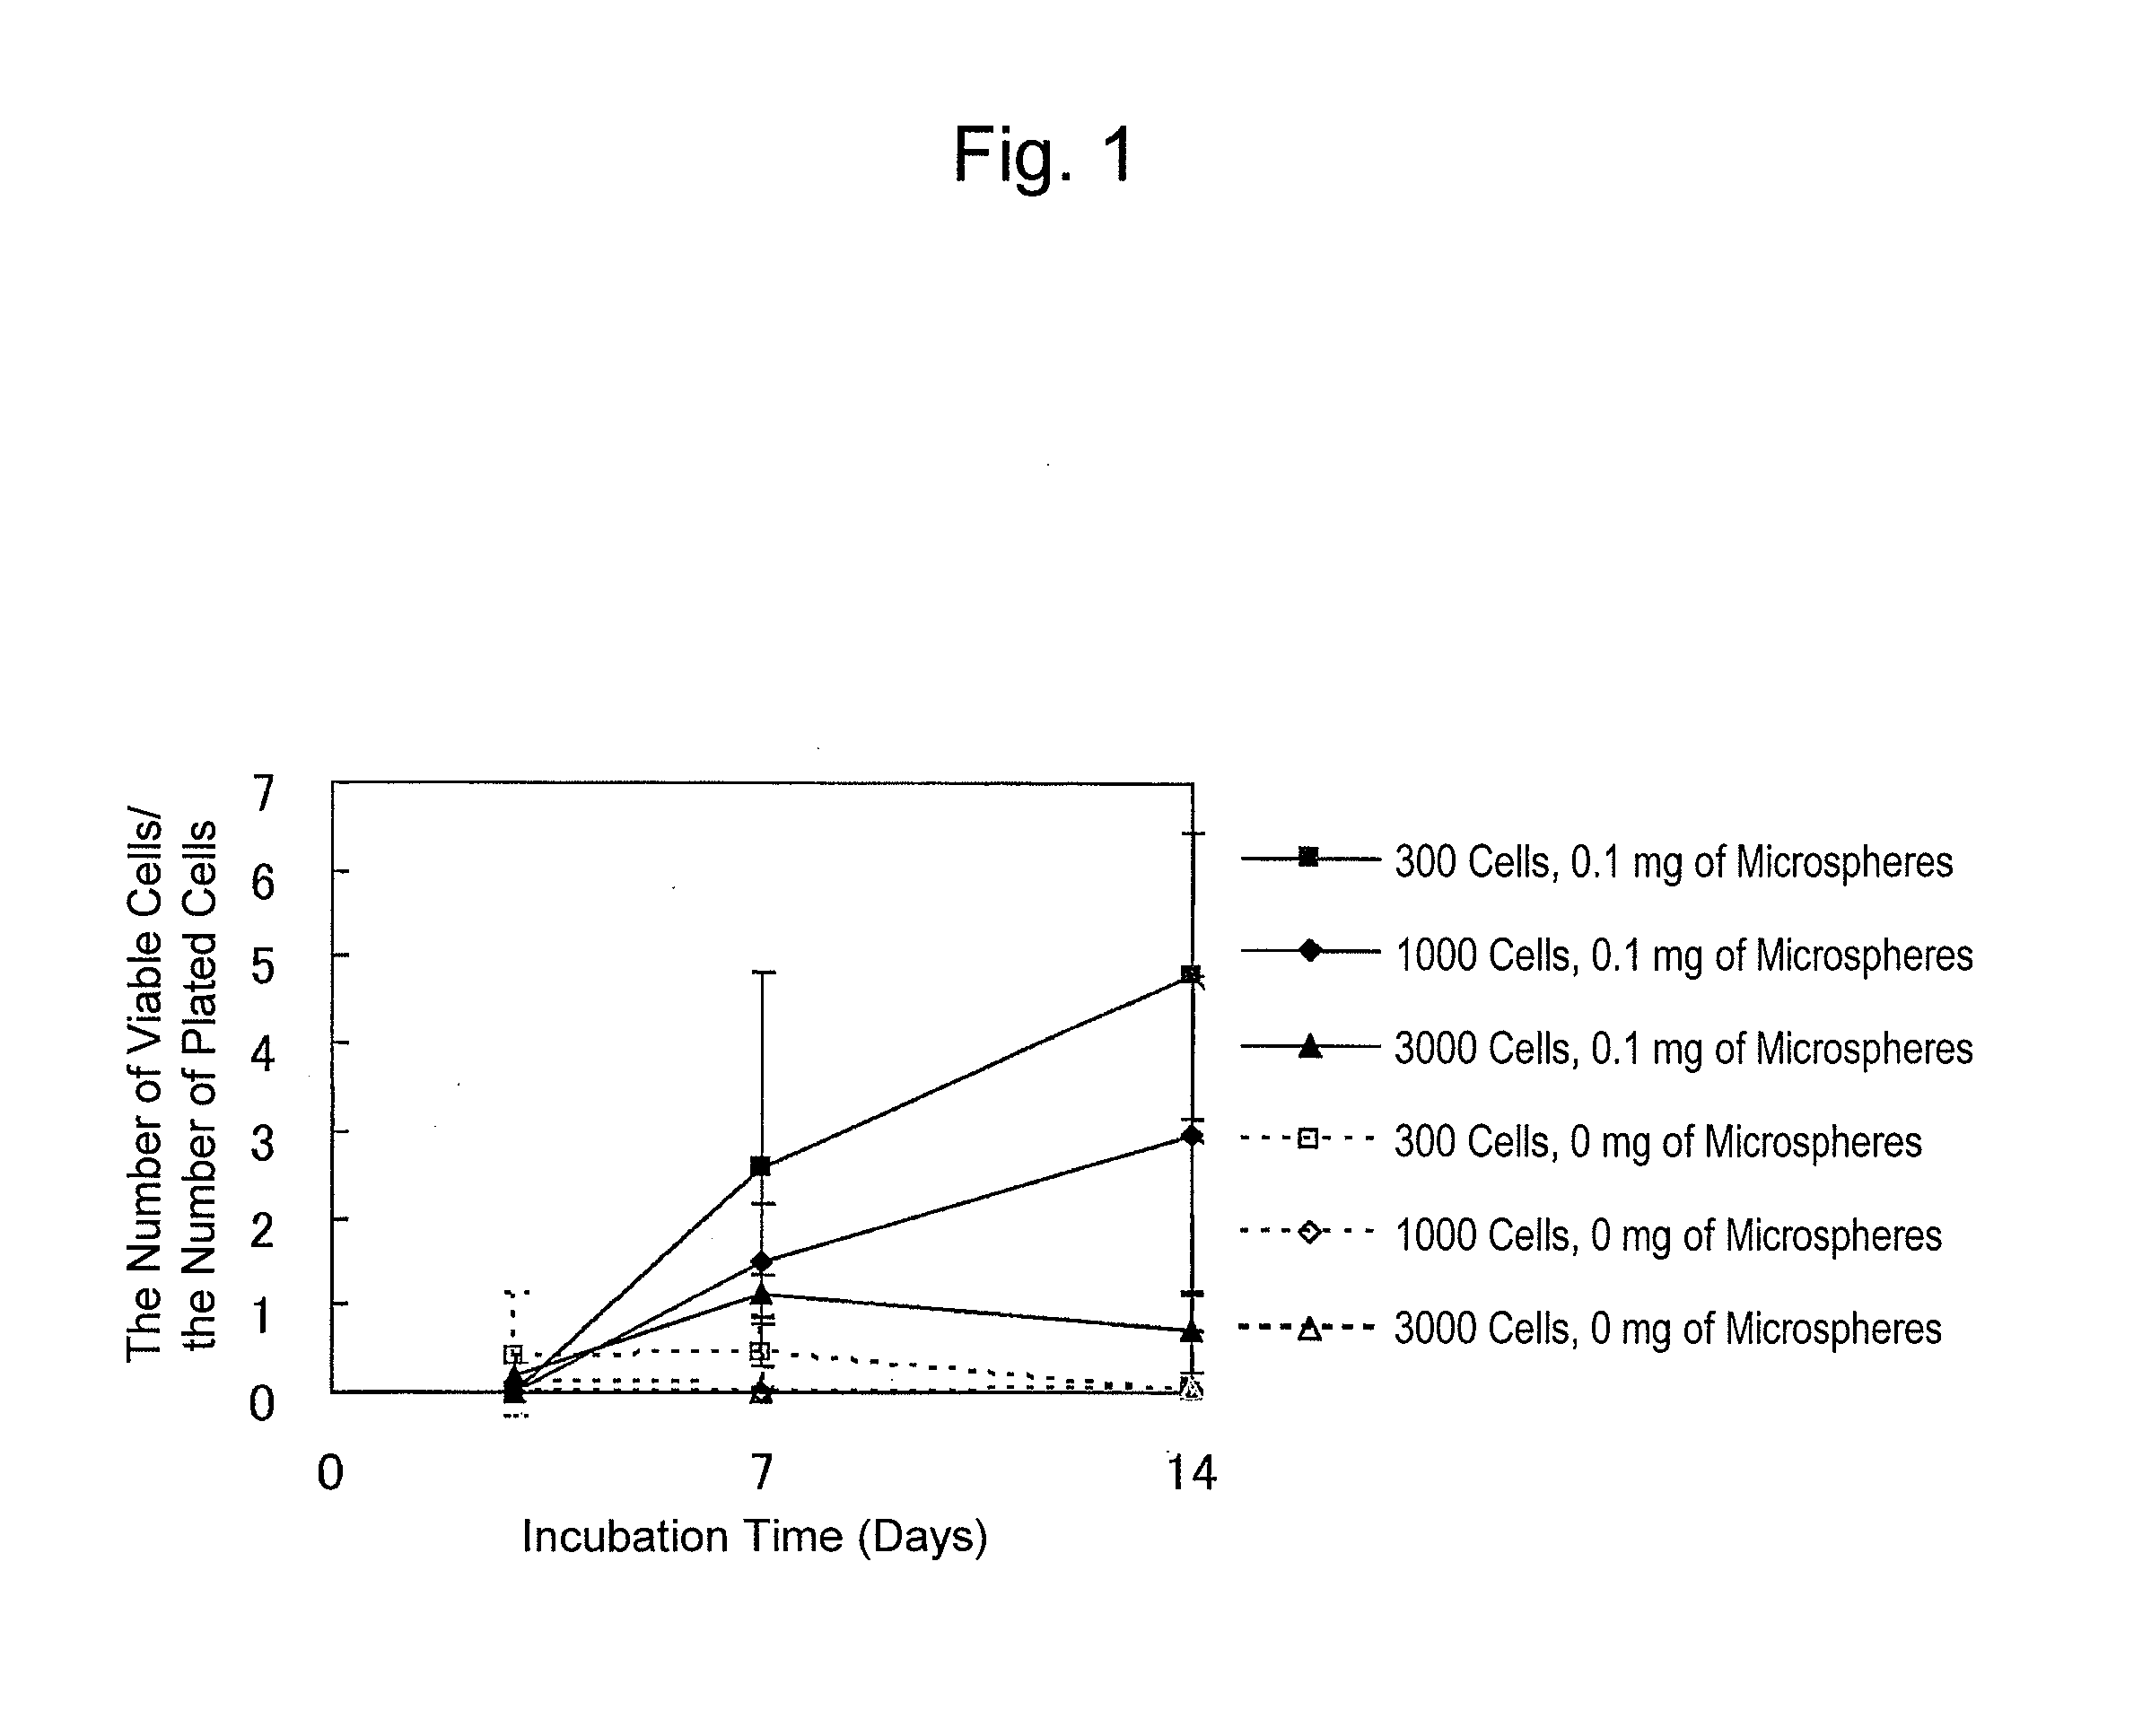 Microsphere-Containing Cell Aggregate